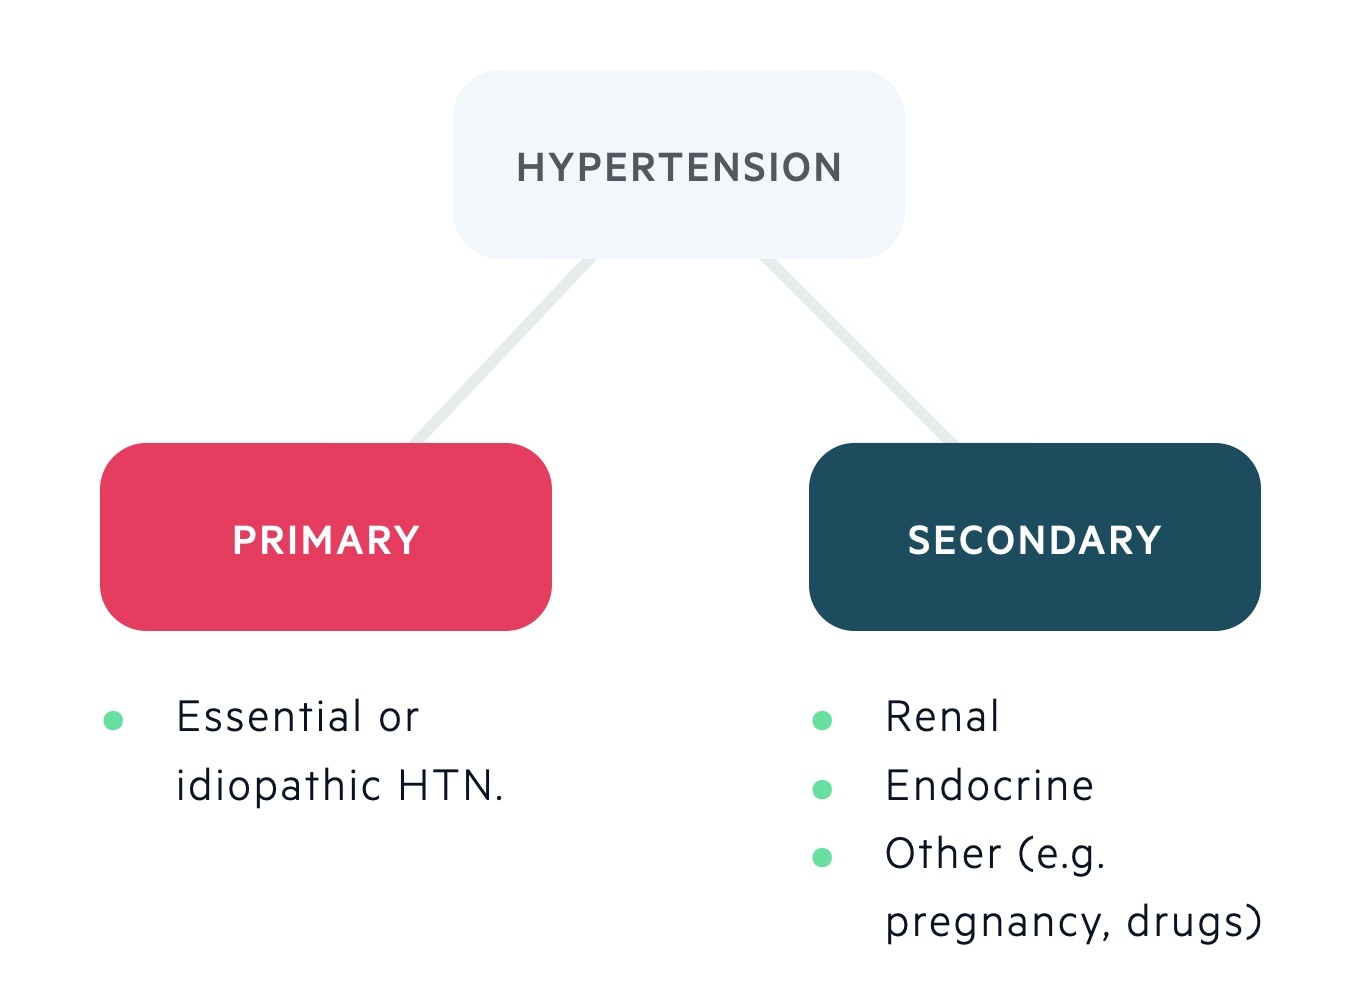 primary hypertension causes and symptoms